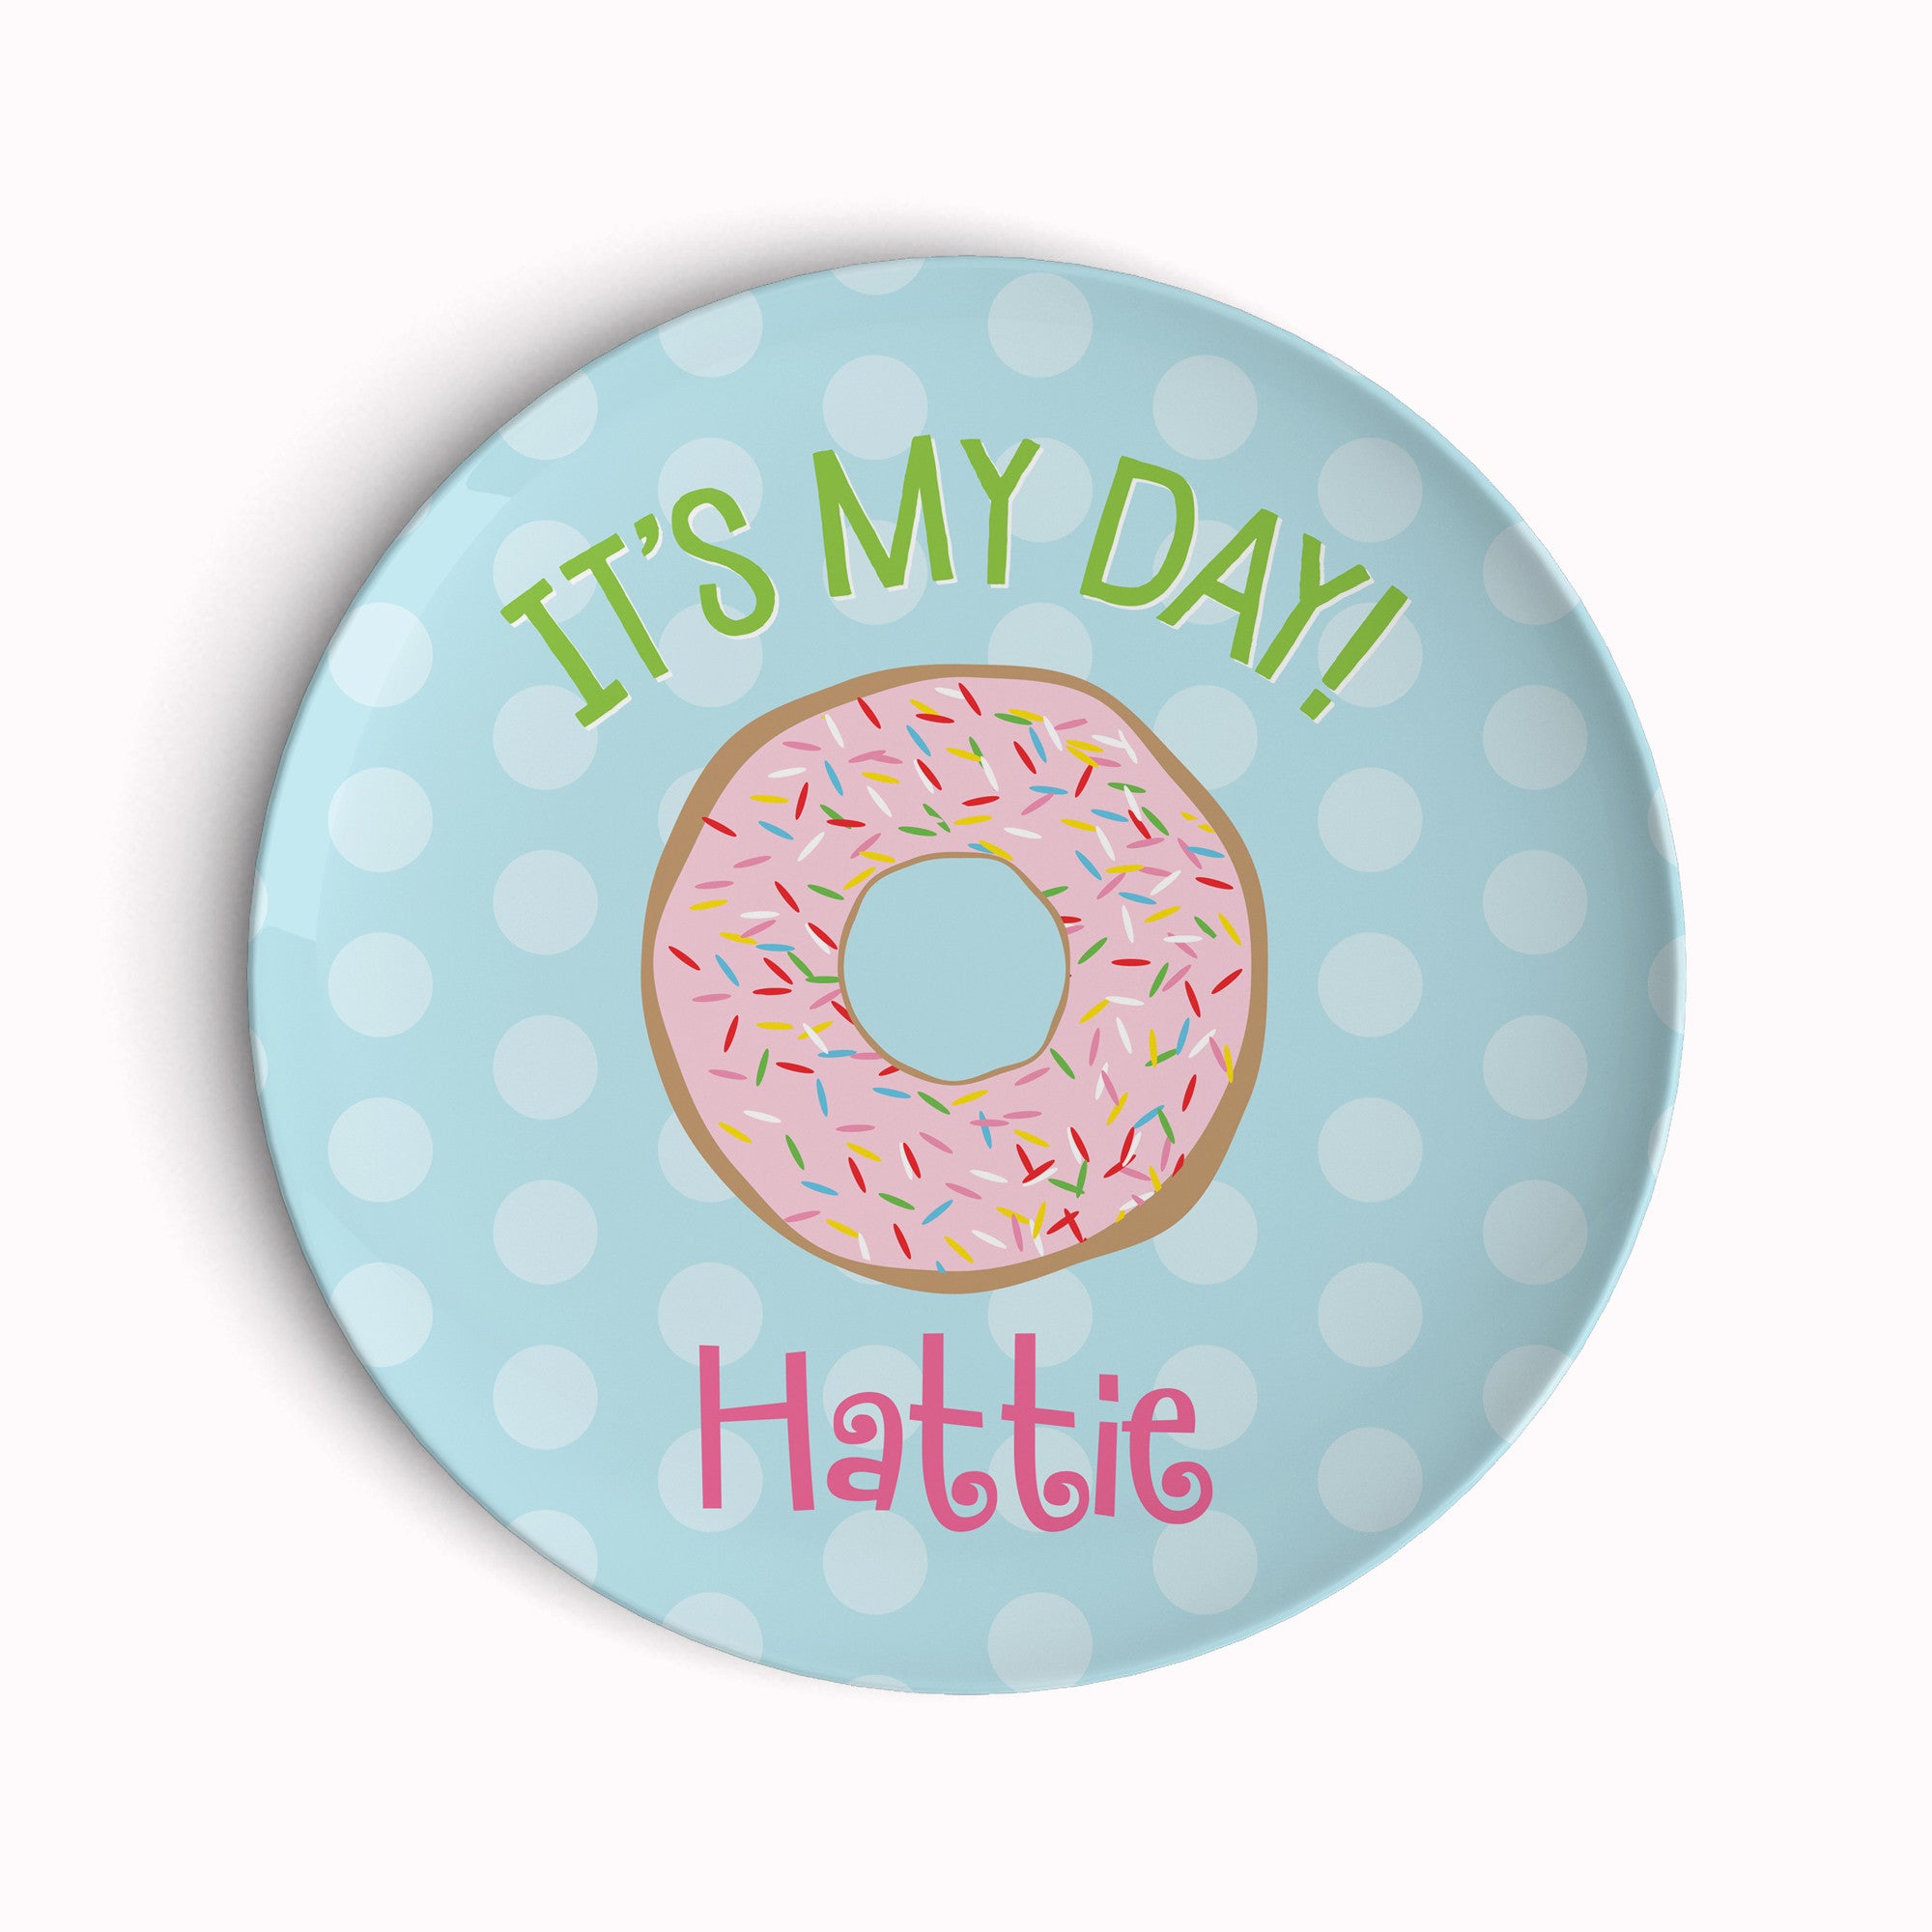 It's My Day! Donut Plate - 2 styles!